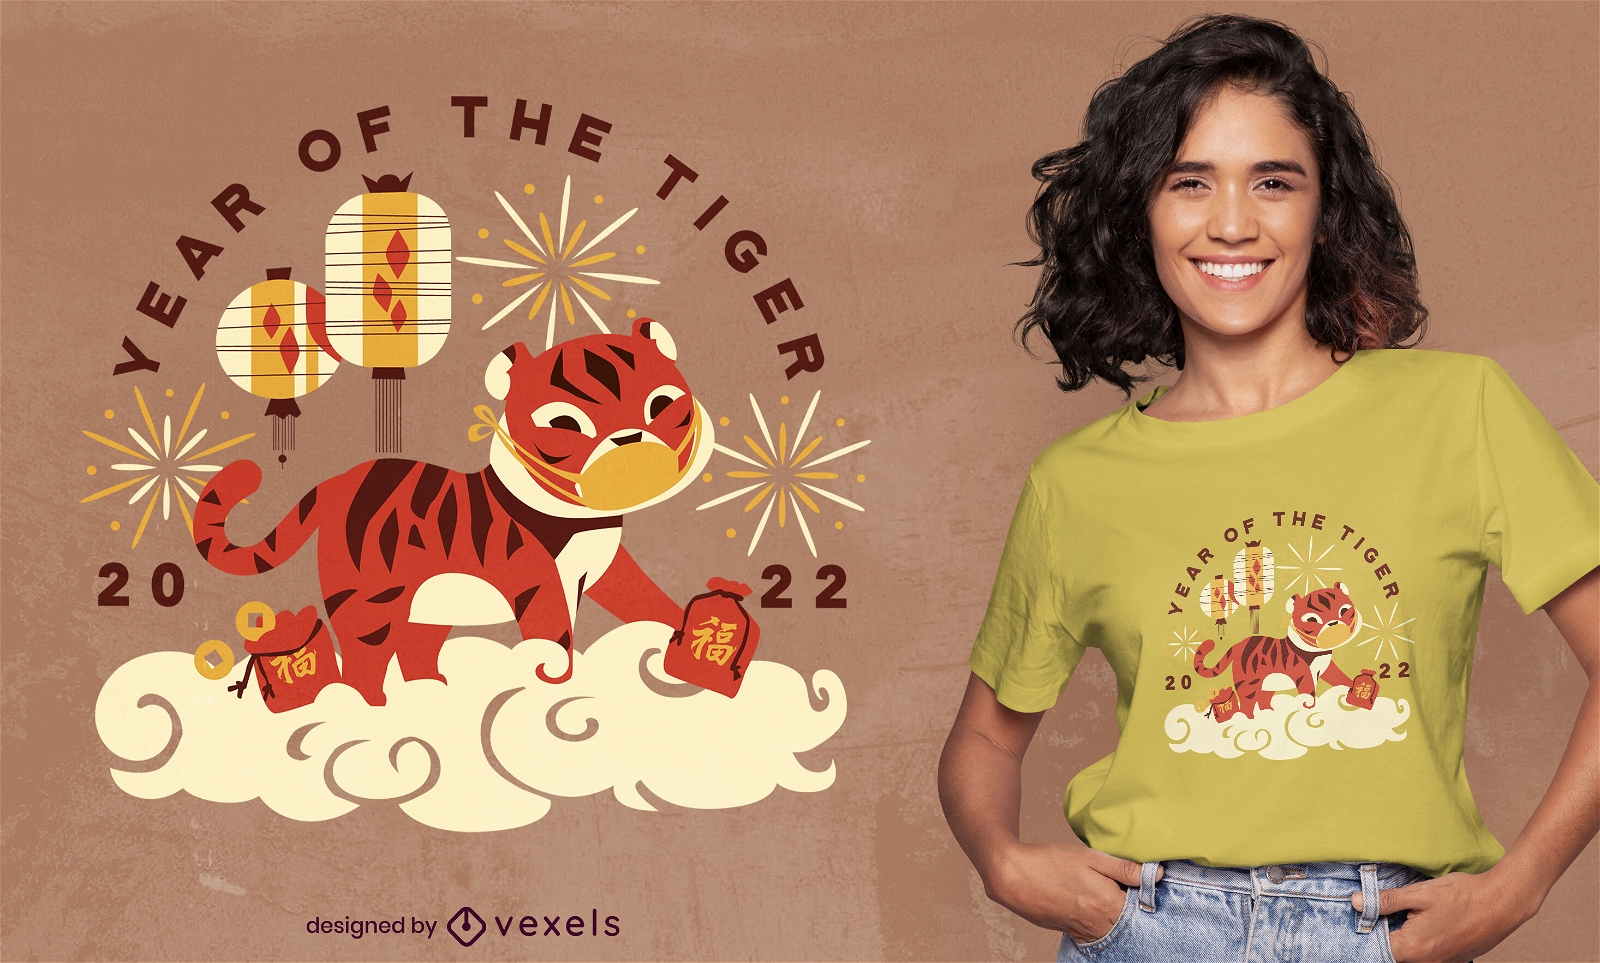 Year of the tiger cloud t-shirt design